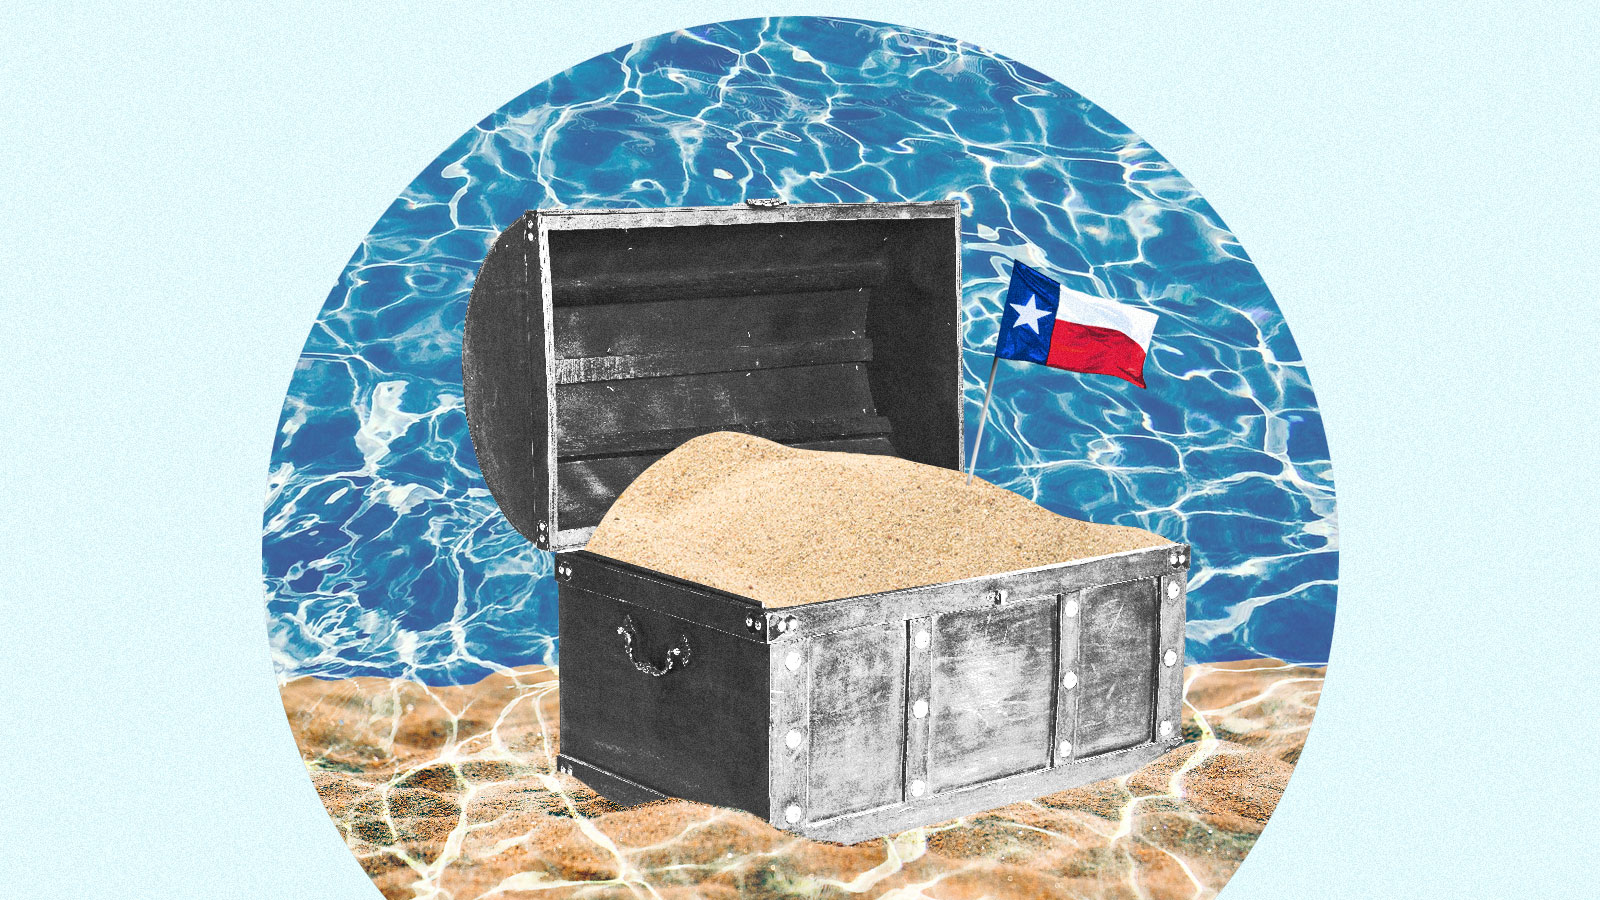 A treasure chest filled with sand and a small Texas flag